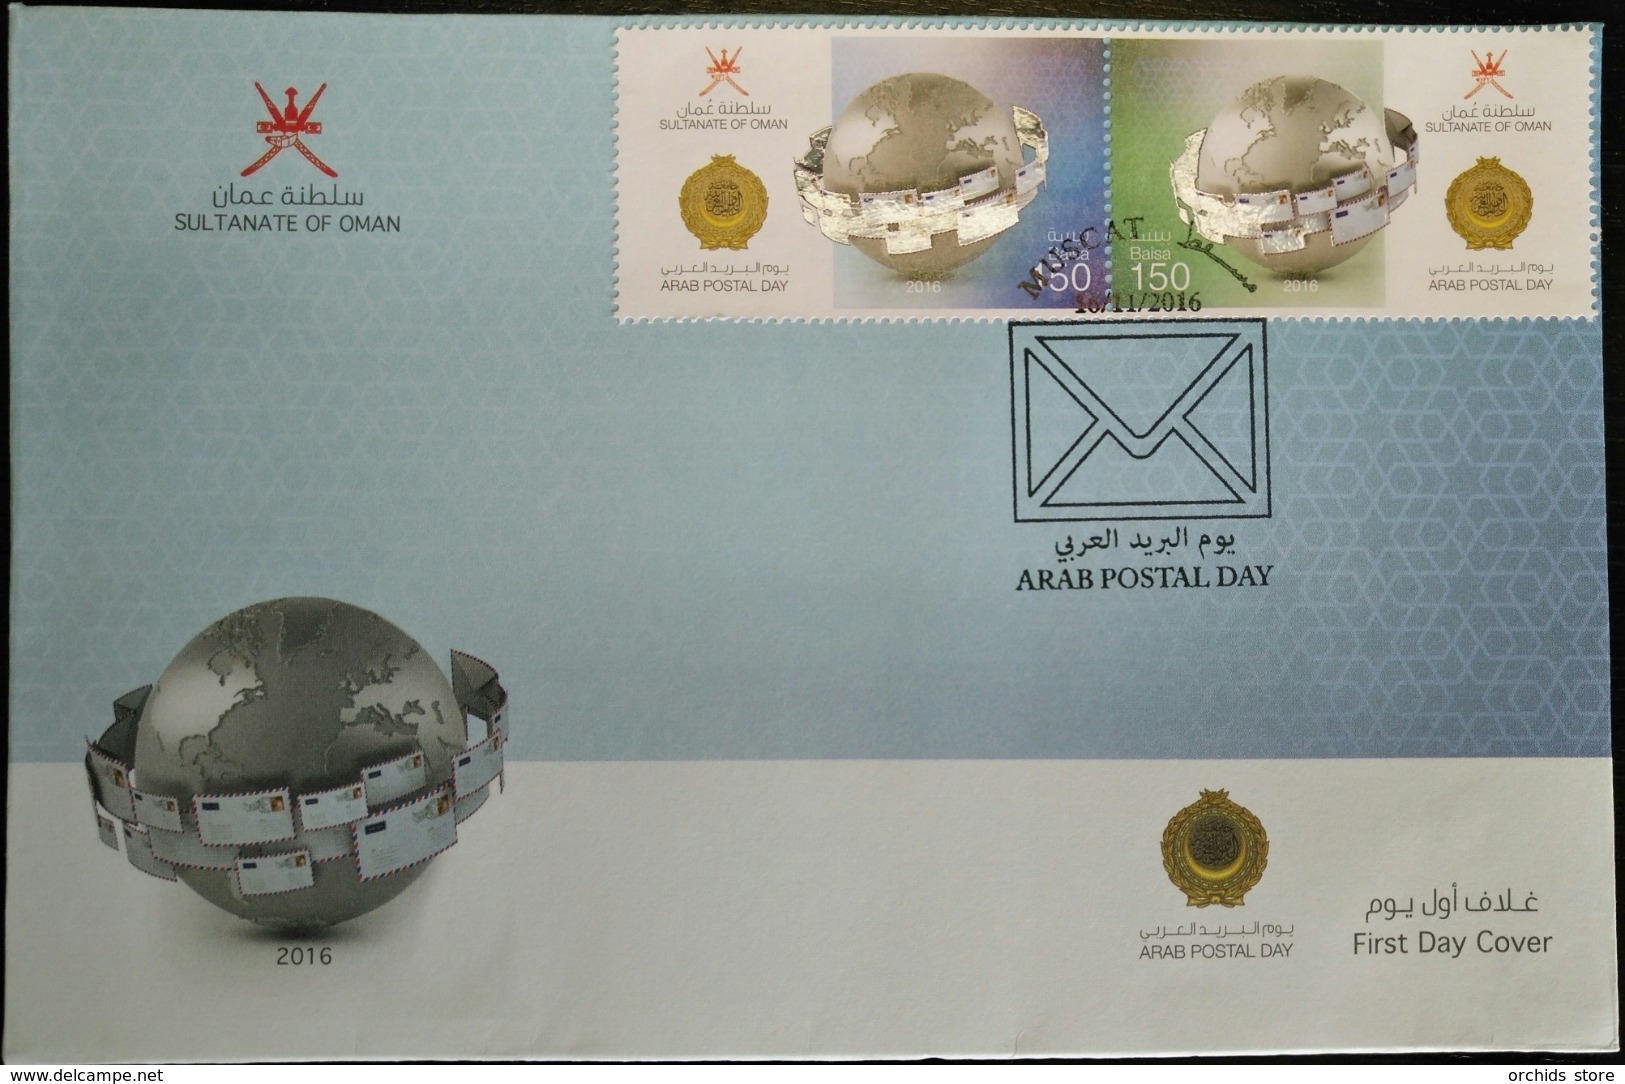 Sultanate Of Oman 2016 FDC - Arab Postal Day - Joint Issue Between Teh Arab Countries - Oman